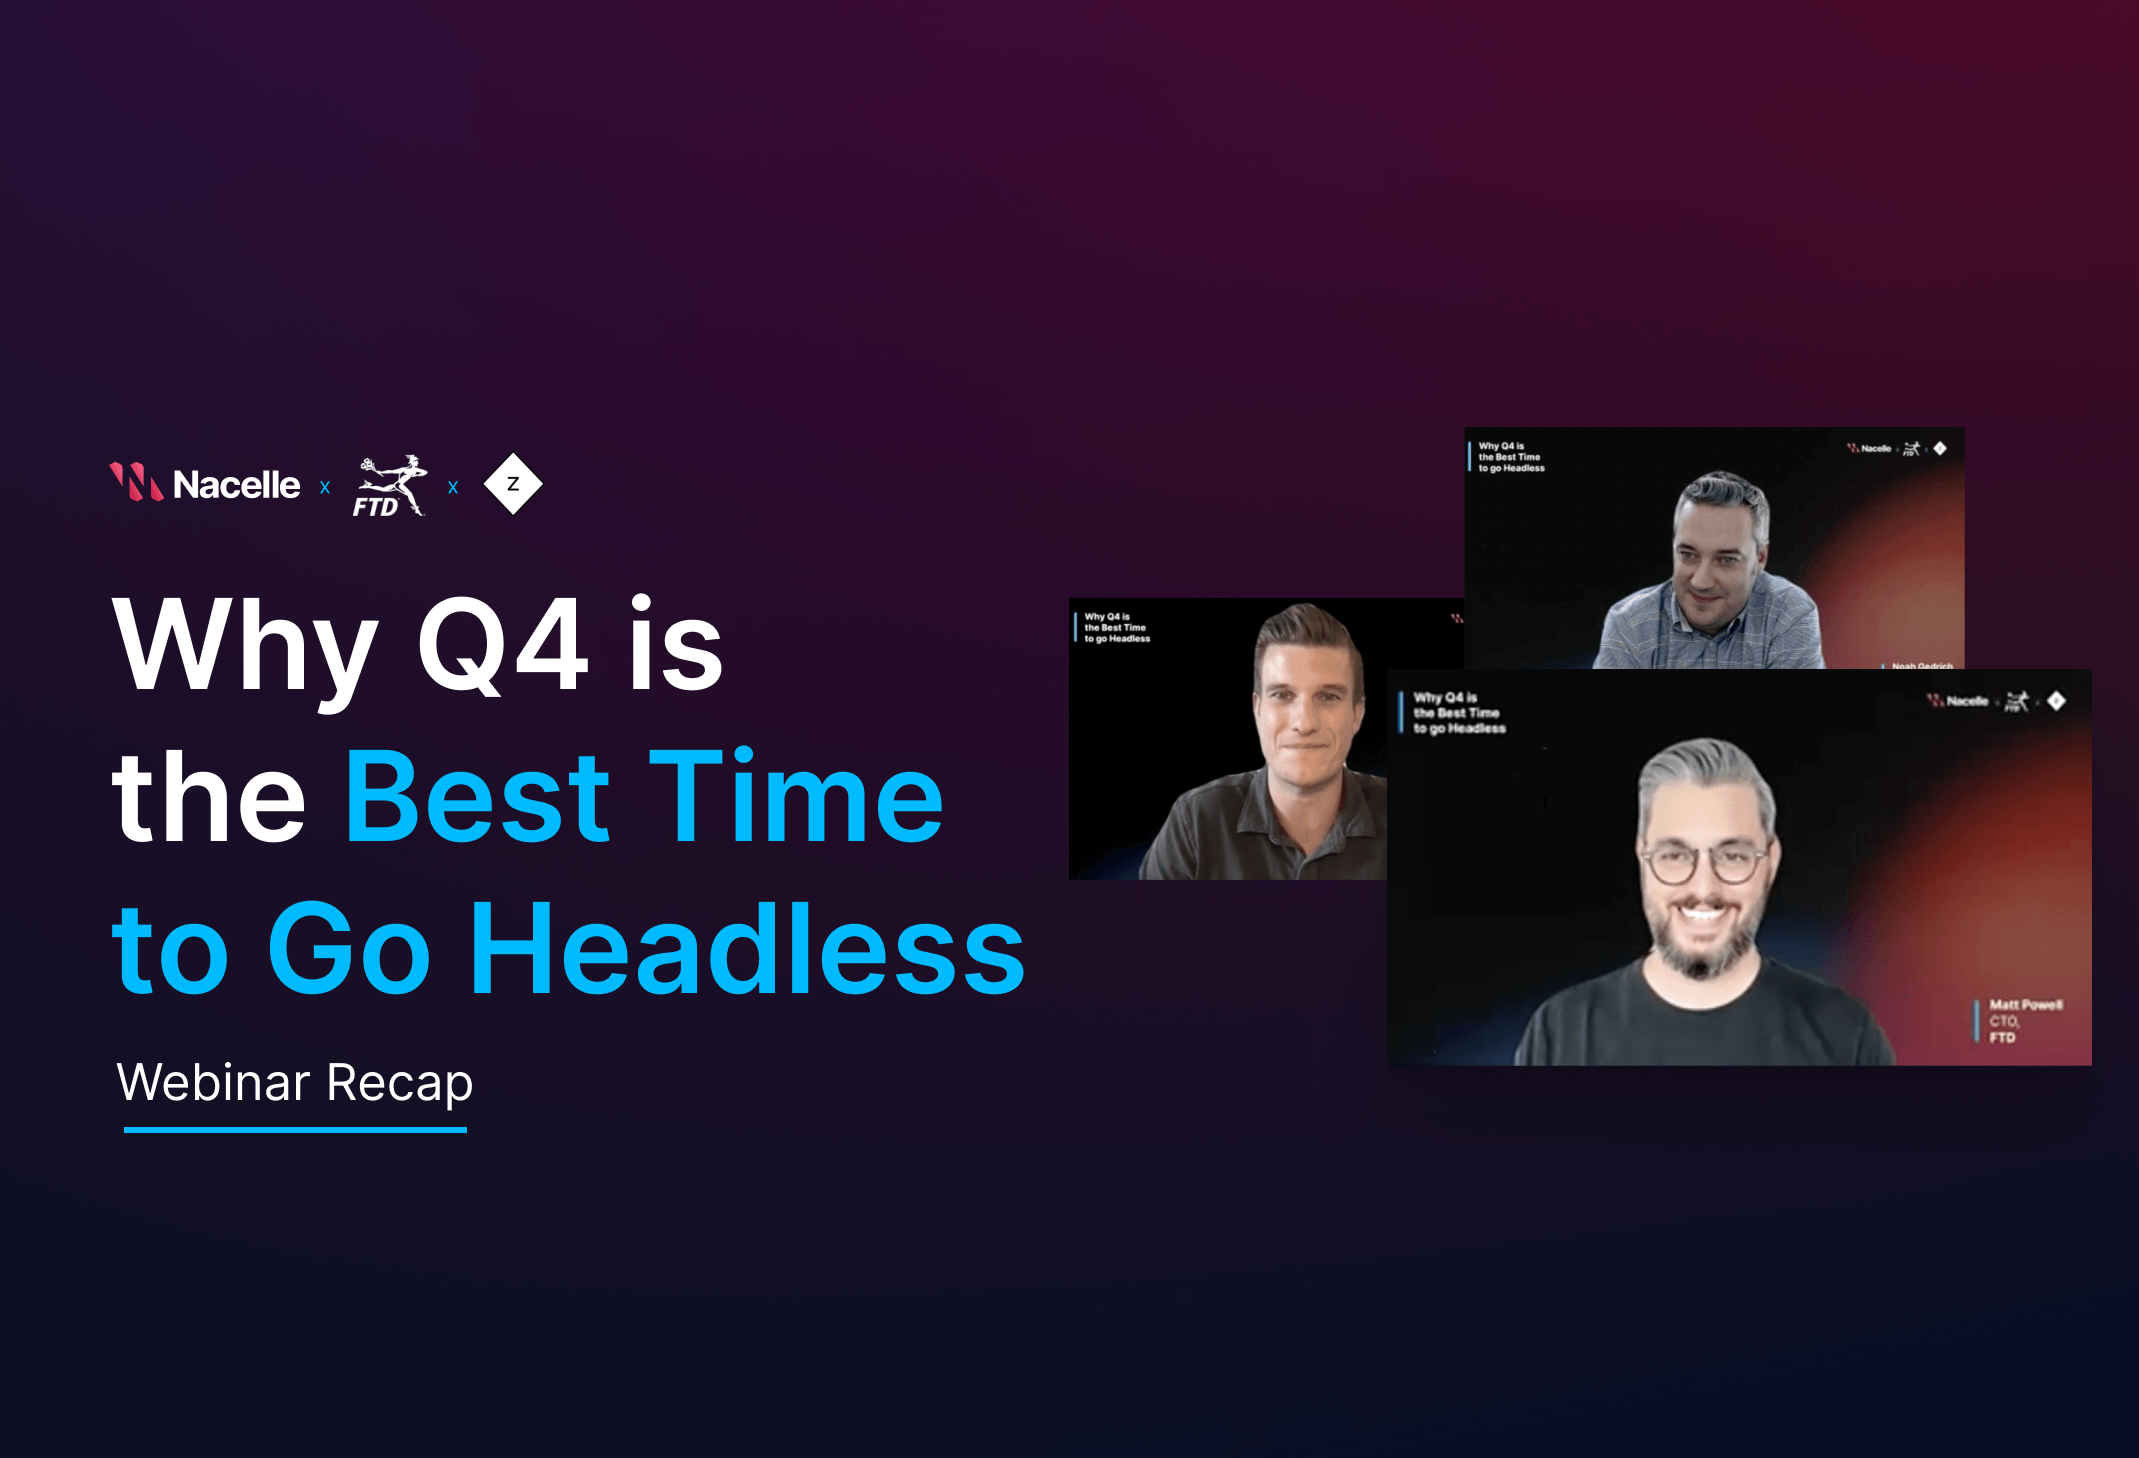  Webinar recap: why Q4 is the best time to go headless 